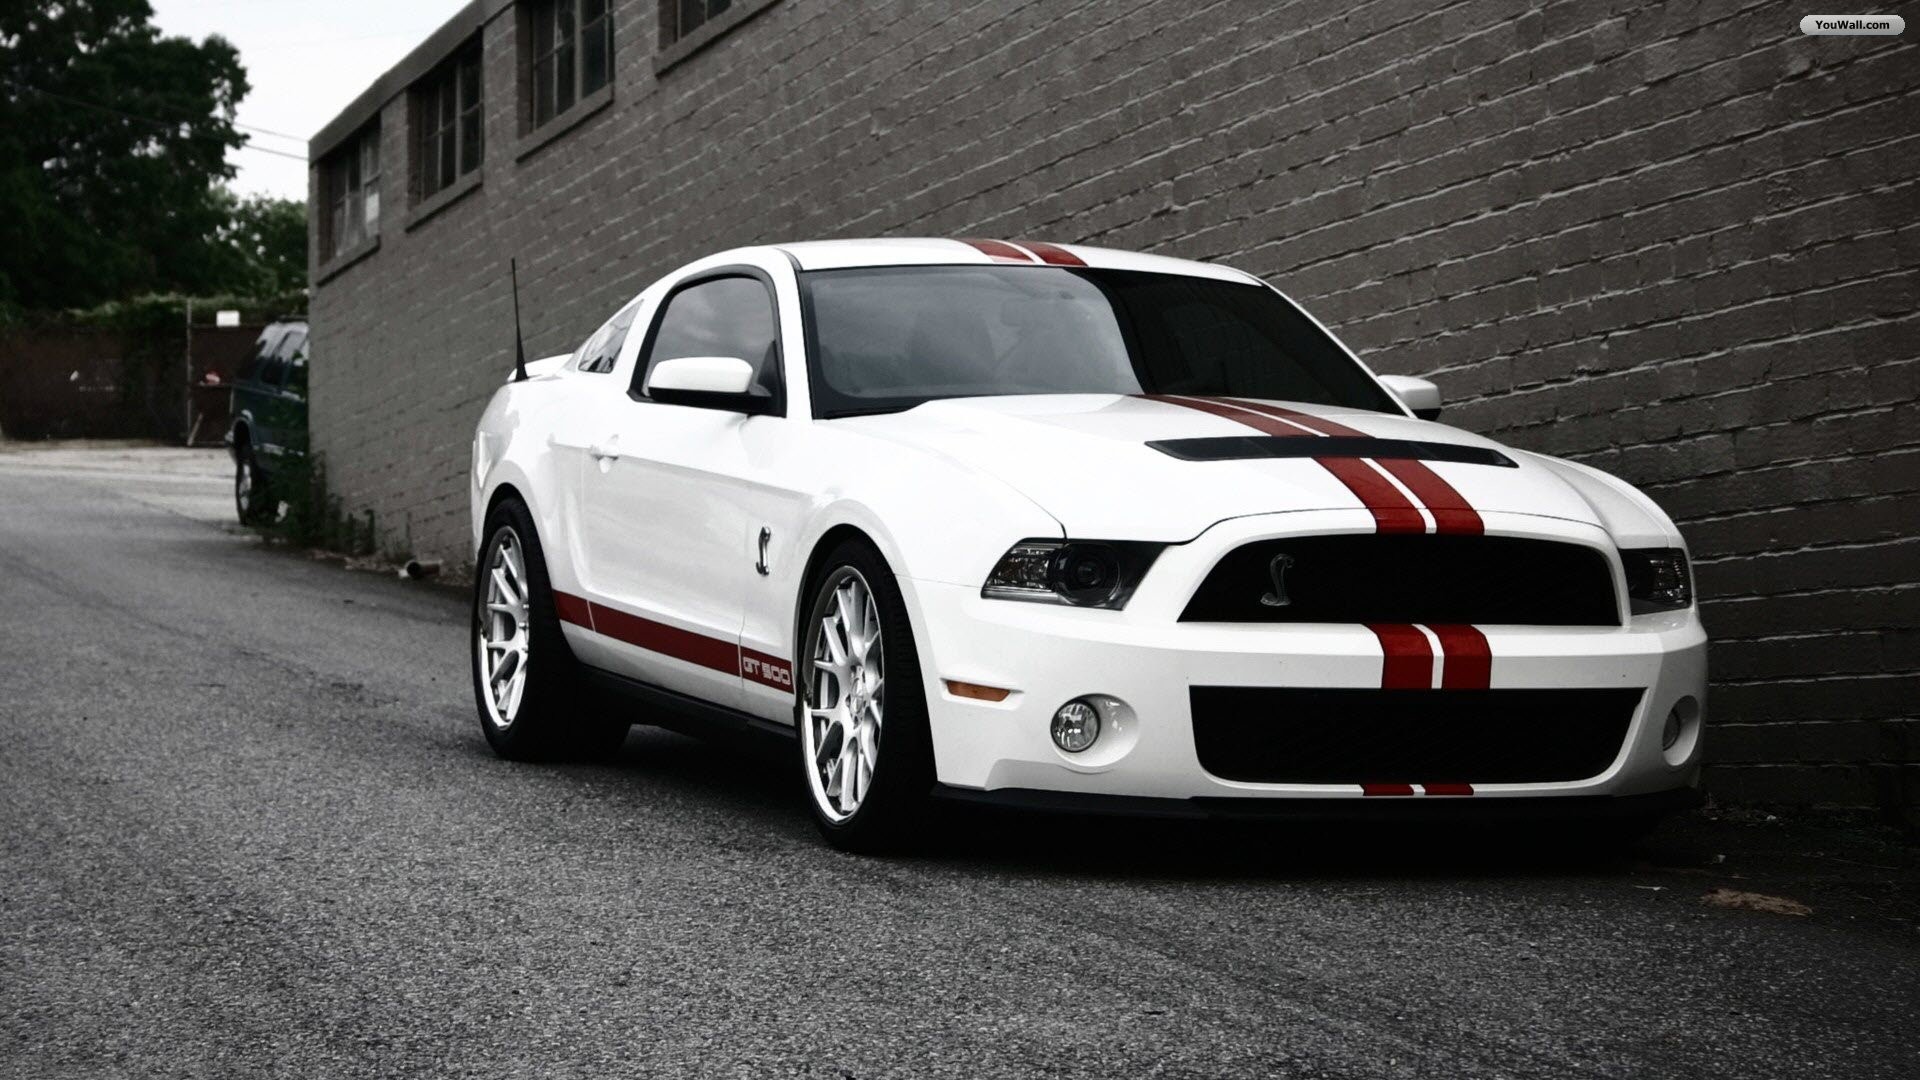 1920x1080 Ford Mustang Shelby Wallpaper